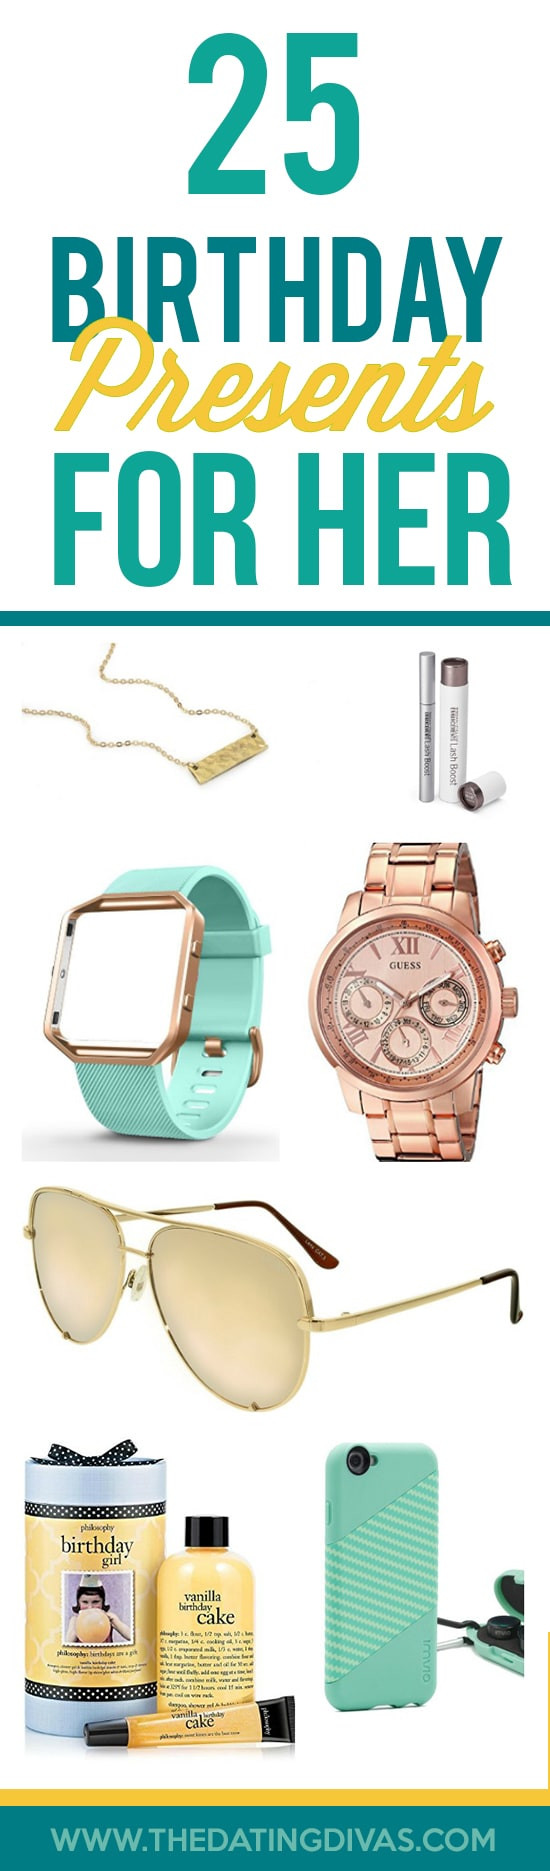 Birthday Gift Ideas For Her
 101 Perfect Birthday Presents for Your Family From The